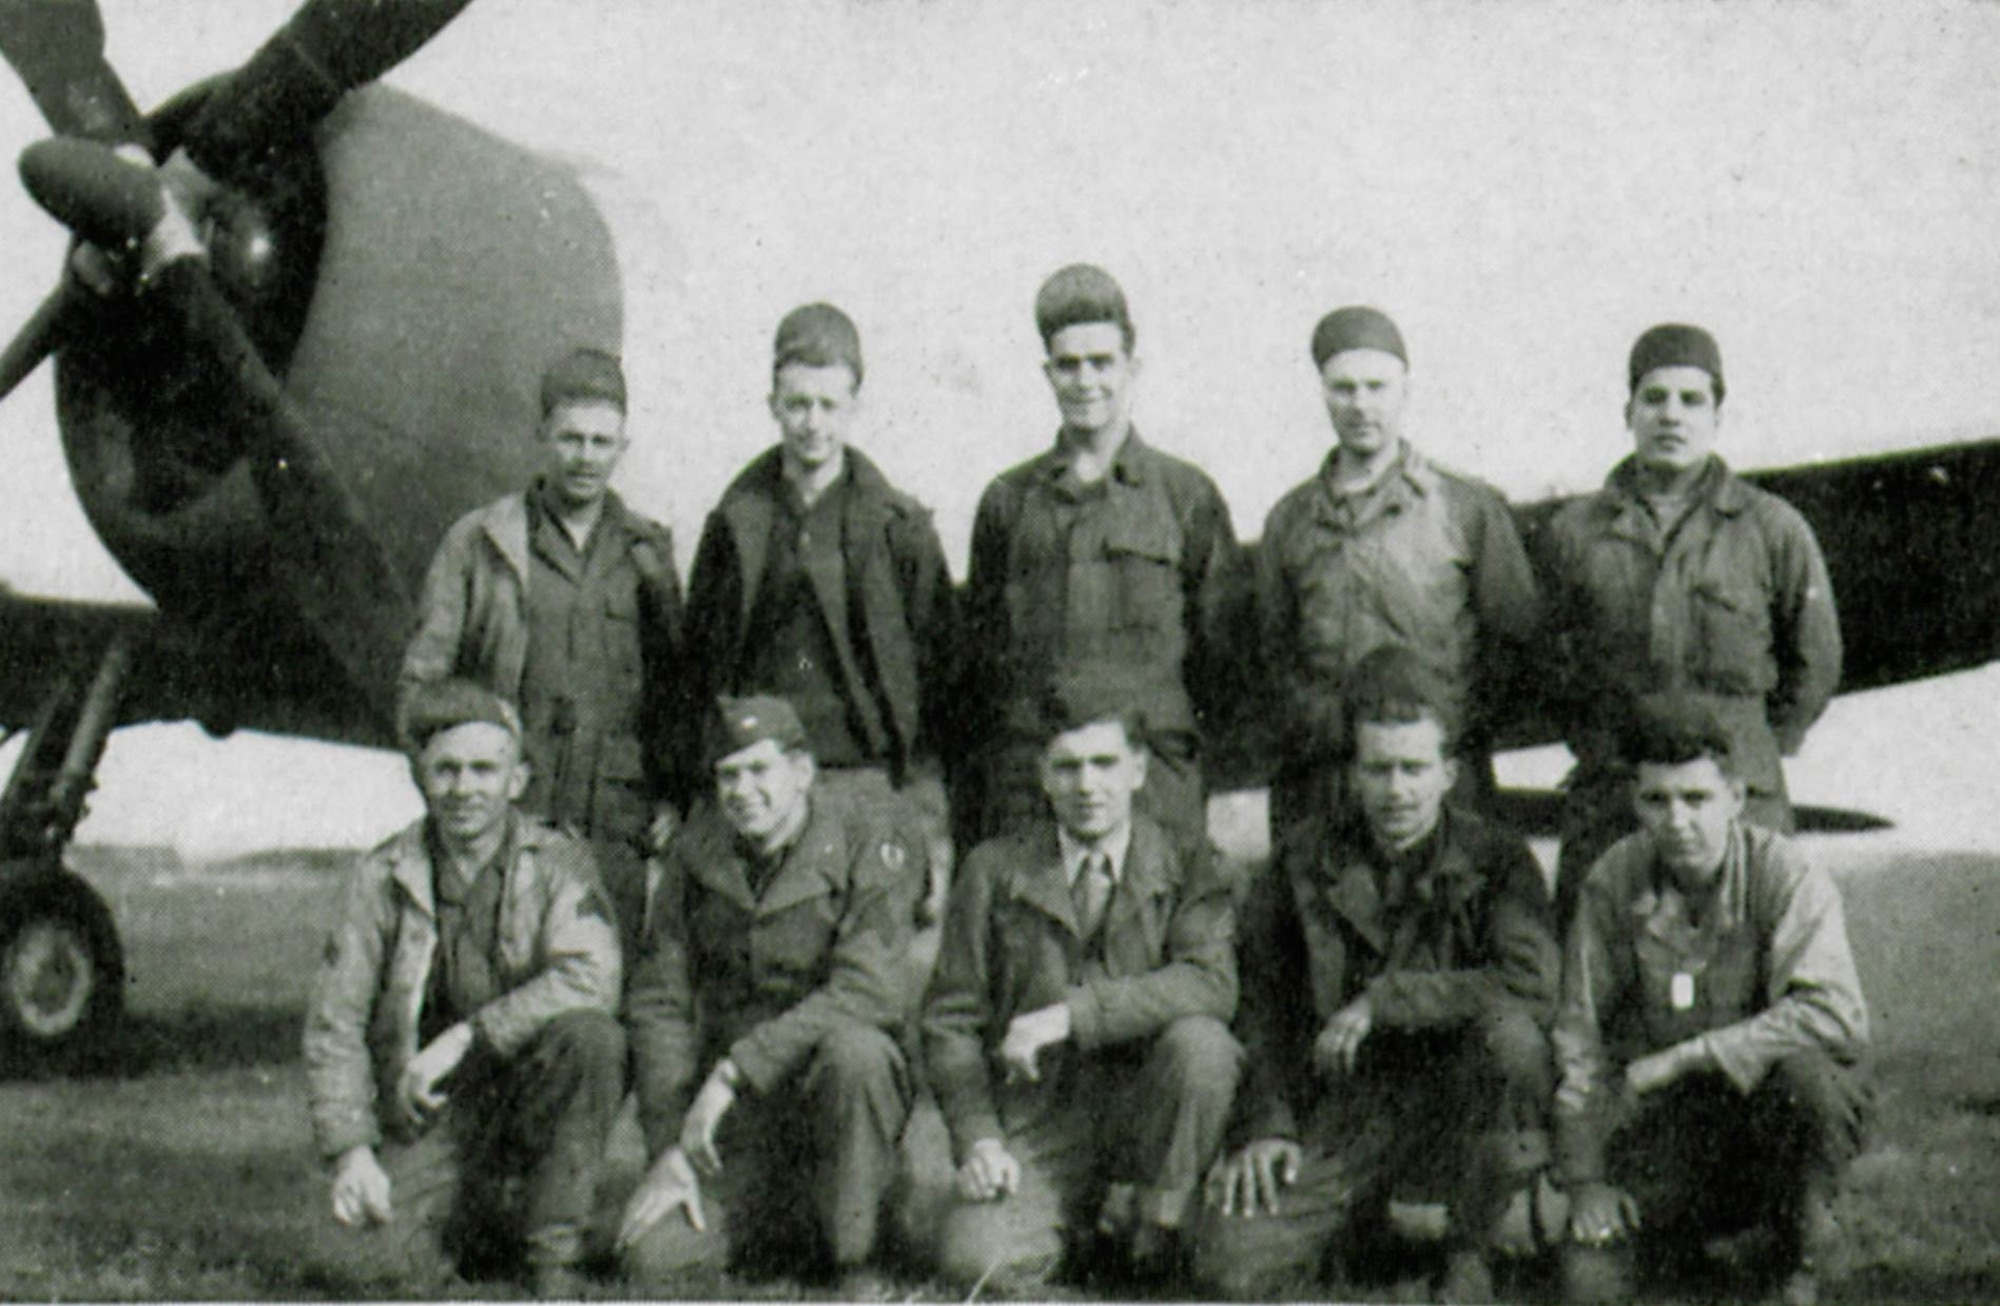 Corporal Robert H. Lindsay, 405th Fighter Squadron Armorer seen here standing, fourth man from the left, witnessed the lucky return of Major John Leonard, who was shot down by “friendly fire” during a supply drop mission for the Lost Battalion.  He told of the Major’s encounter with the anti-aircraft gunners who shot him down.  Other men pictured are, from left to right, standing, Charles D. Stebbins, Harold J. Baker, Jack P. Starr and at far right, Louis Lopez.  Kneeling are Clyde C. Arthurs, John M. Mann, Gerald E. Kinter, Francis J. Flinn and Ezra W. O’Connor.  (The Story of the 371st Fighter Group in the E.T.O., page 126)